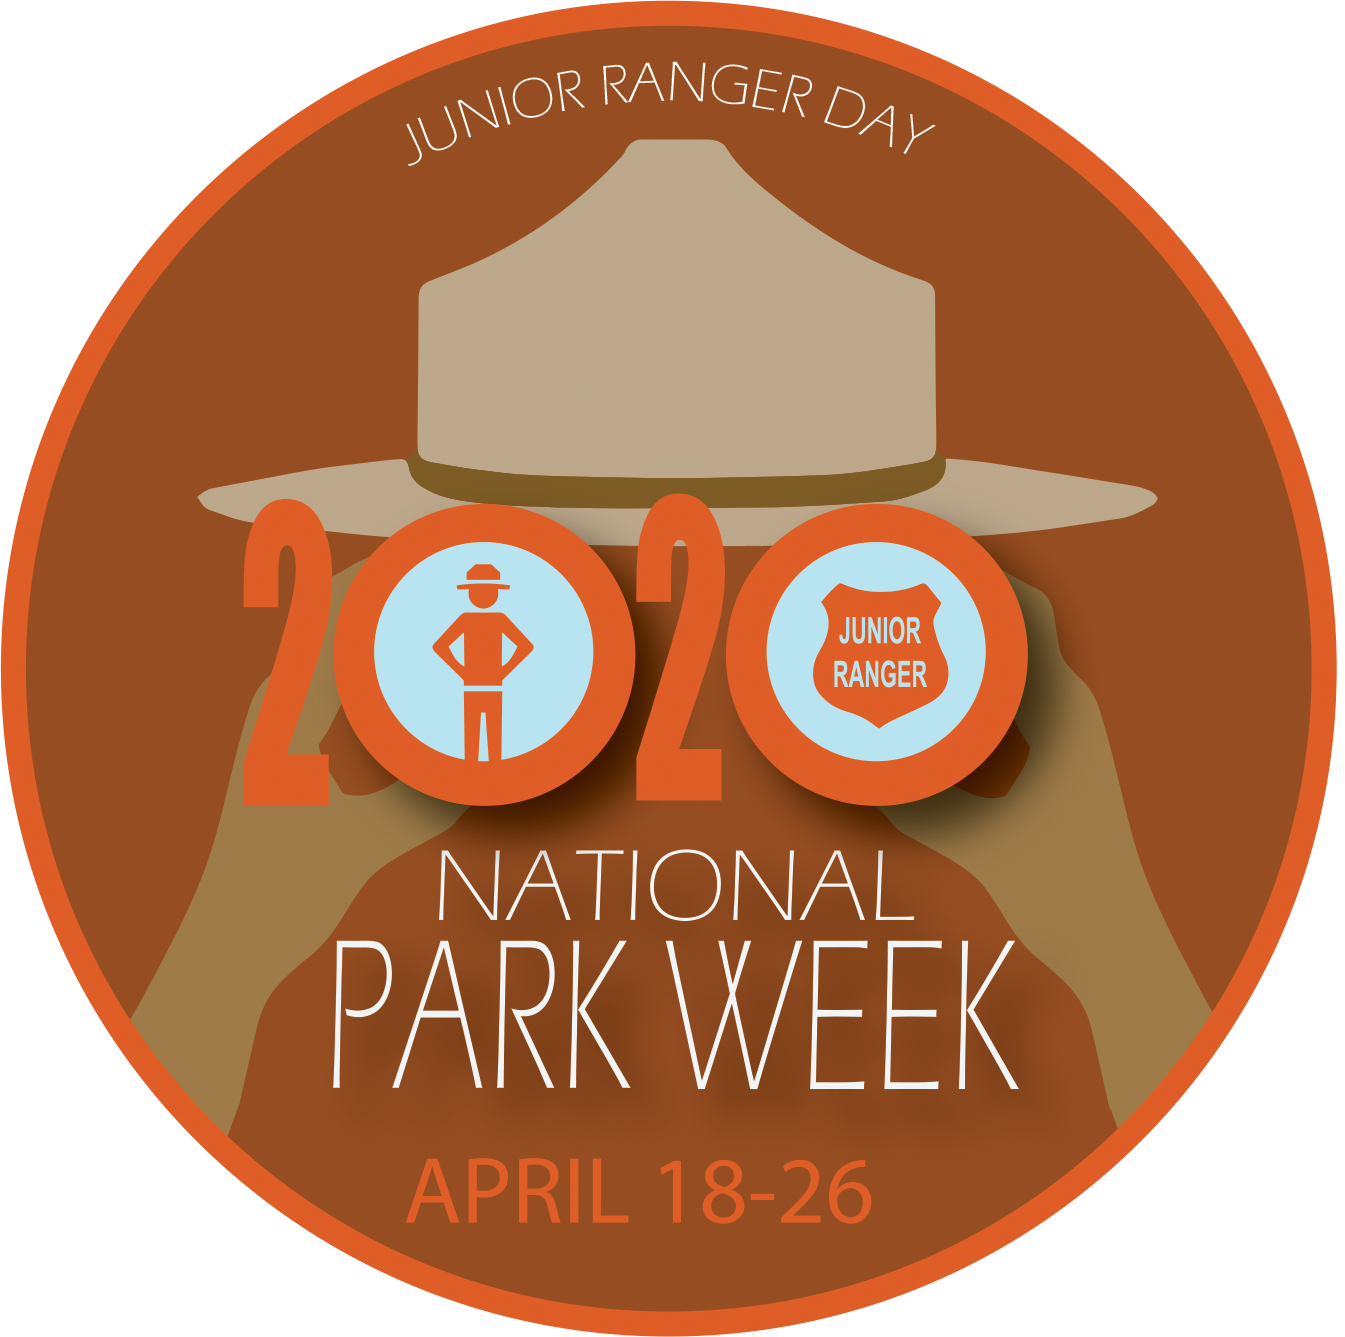 a shaded orange circle with the text Junior Ranger Day 2020 National Park Week April 18-26. The zeros in the 2020 text are drawn to be the eyes of binoculars with arms extending and a ranger flat hat sitting on top. Inside the first zero is the silhouette